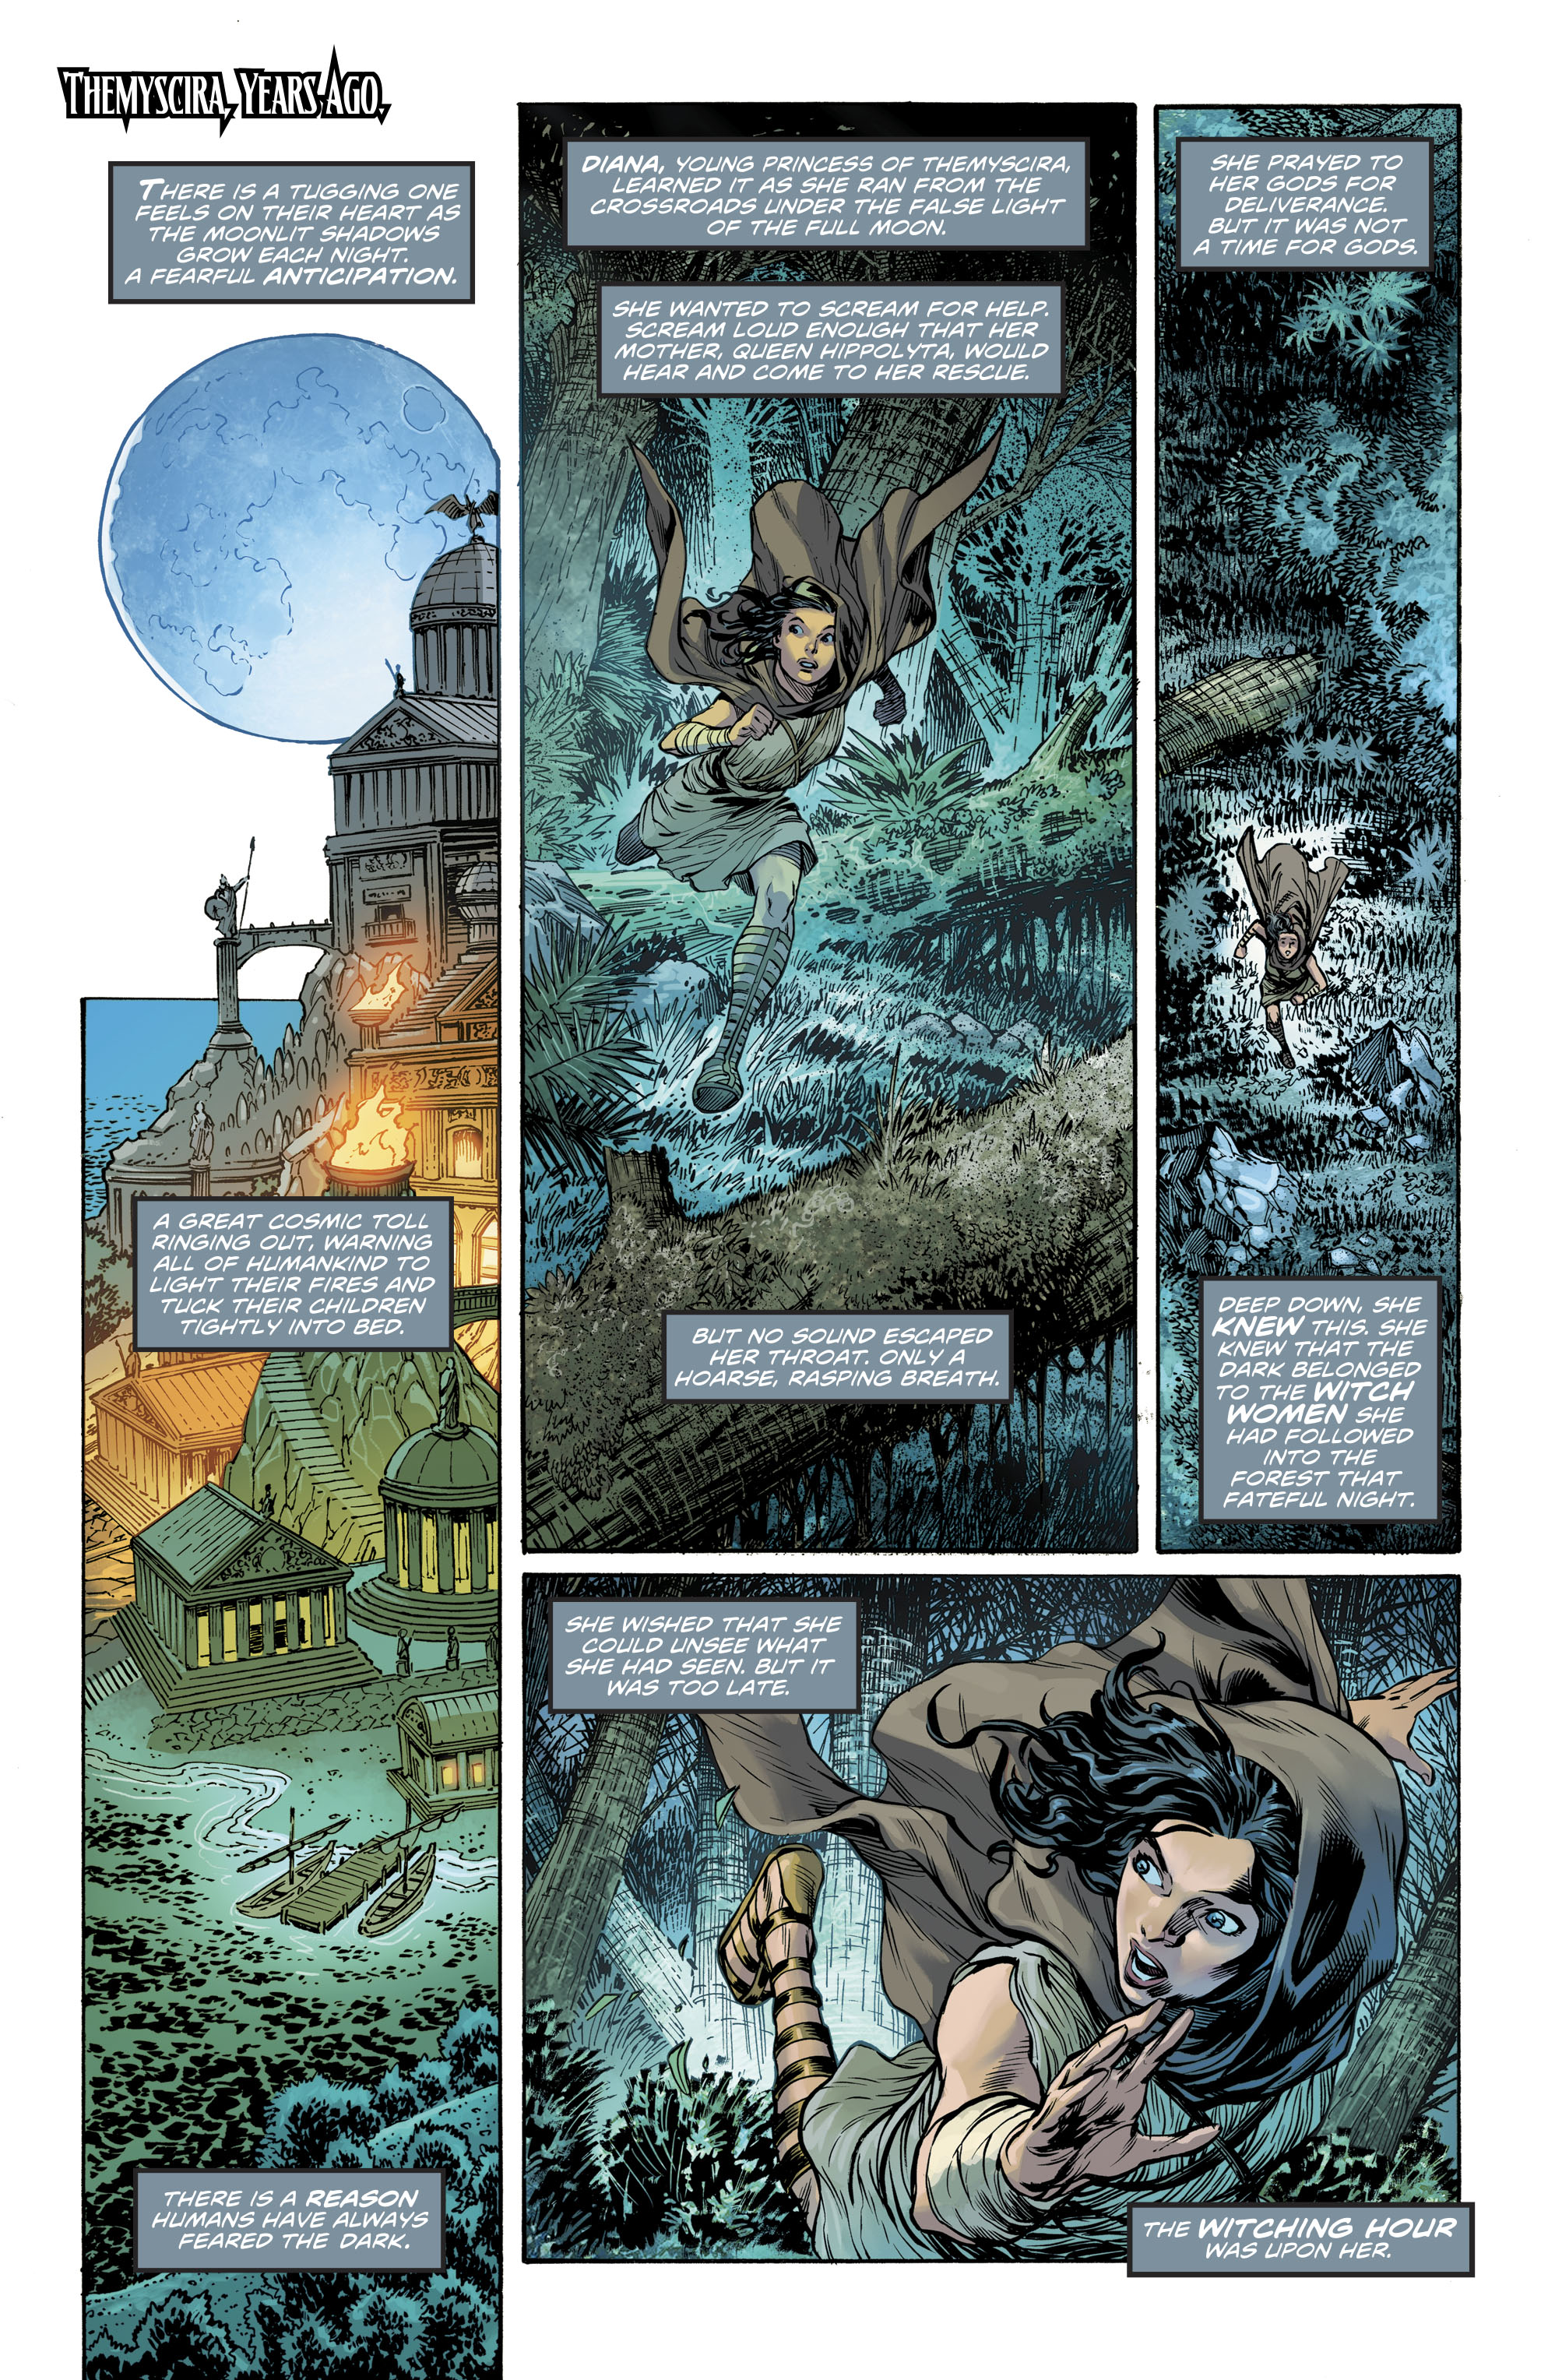 Wonder Woman and Justice League Dark: Witching Hour (2018-): Chapter 1 - Page 4